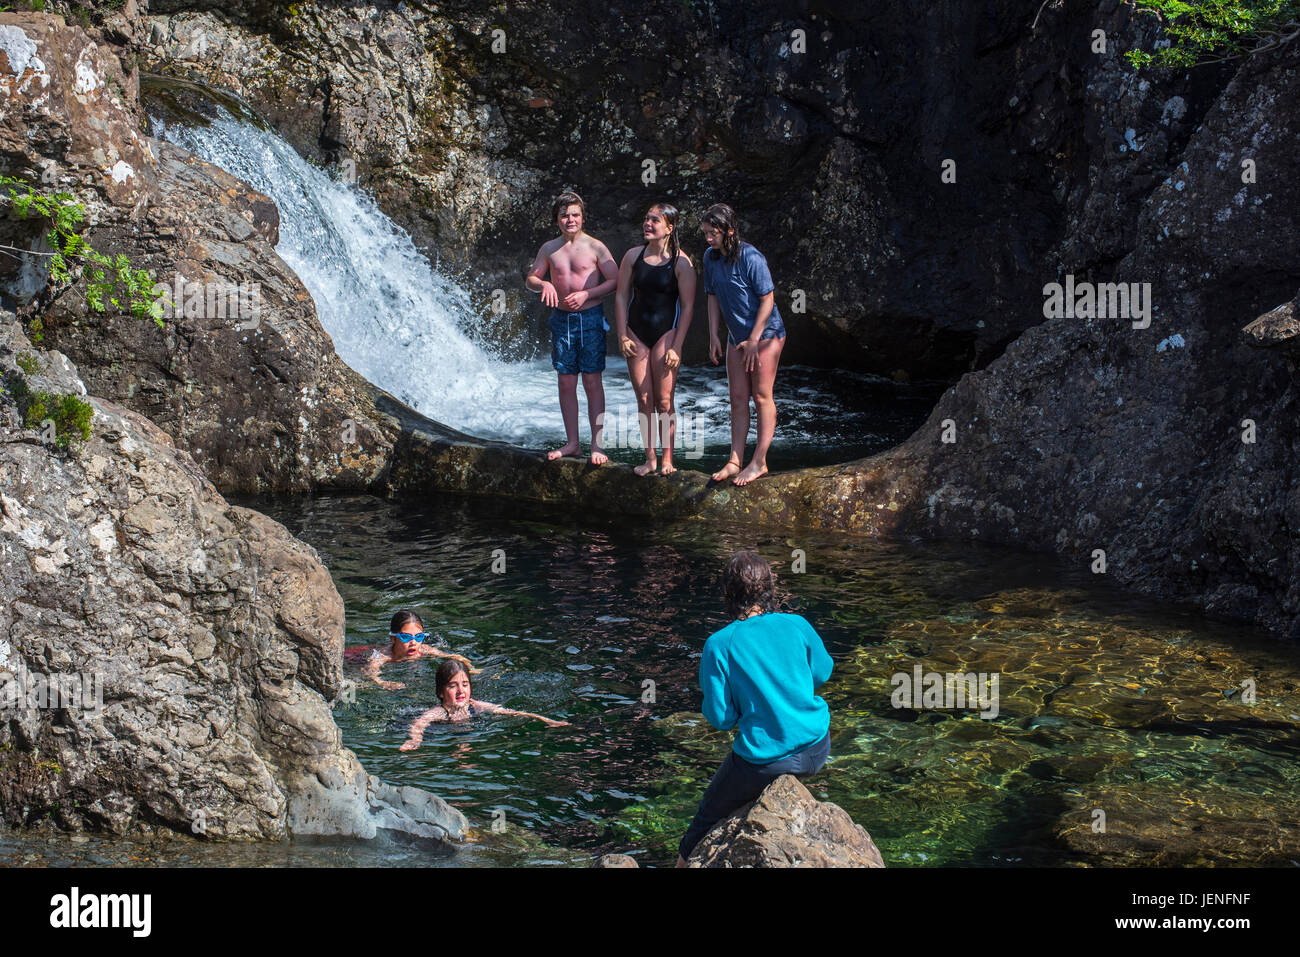 Happy children swimming in water of the Fairy Pools, succession of waterfalls in Glen Brittle on the Isle of Skye, Scottish Highlands, Scotland, UK Stock Photo